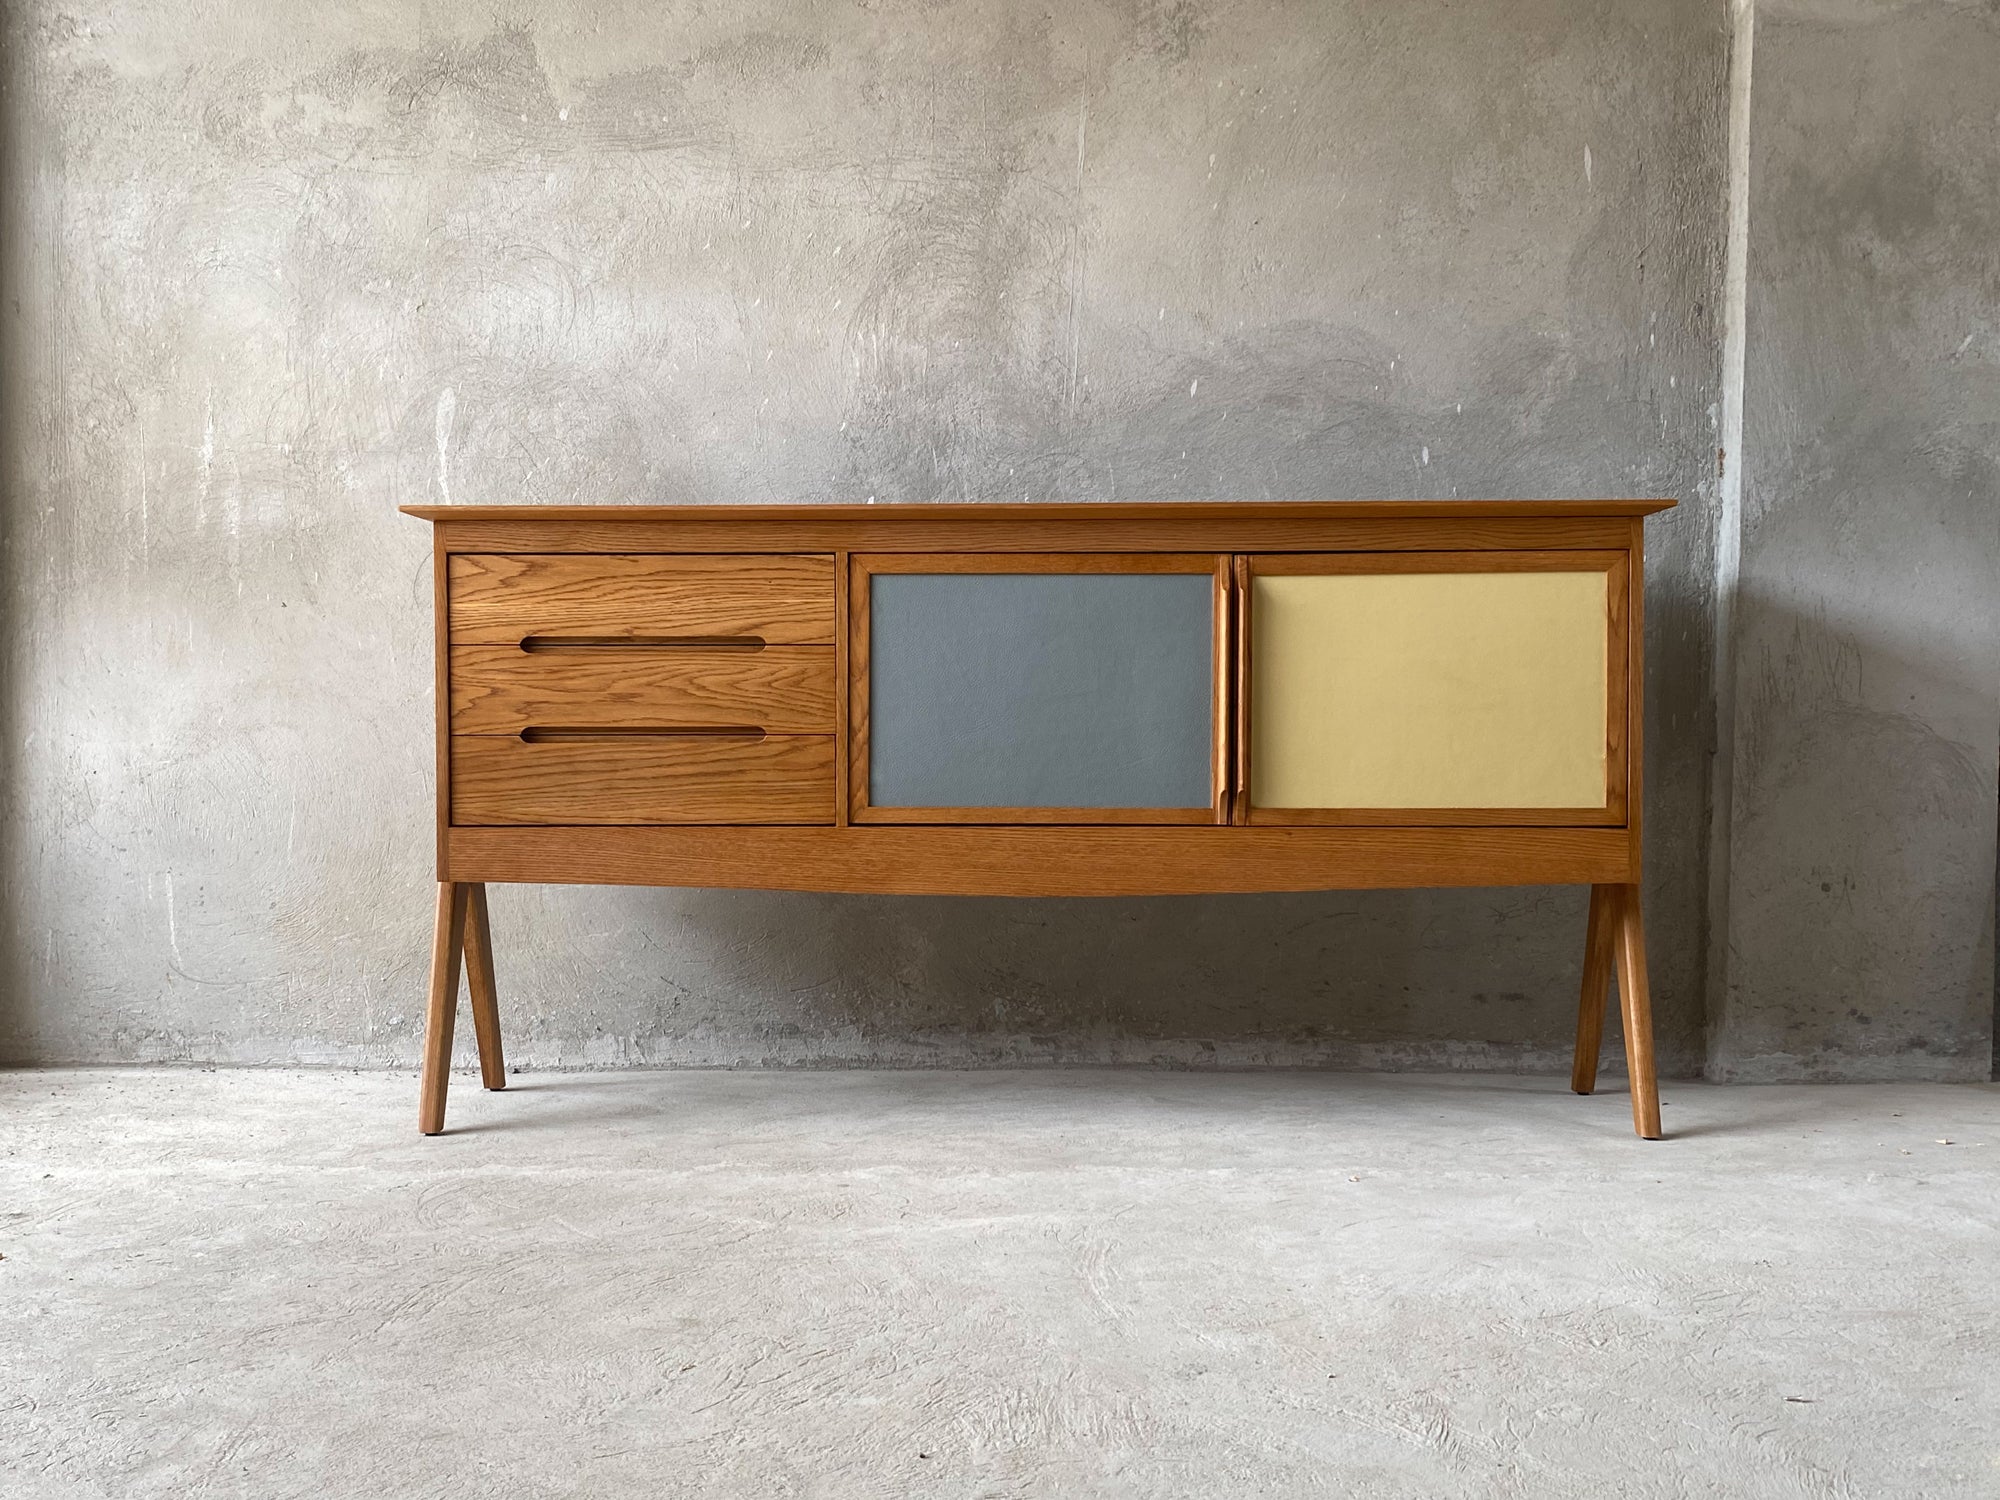 A mid-century modern sideboard crafted from white oak with three drawers and two cabinet doors finished with a hardwax oil wood finish.